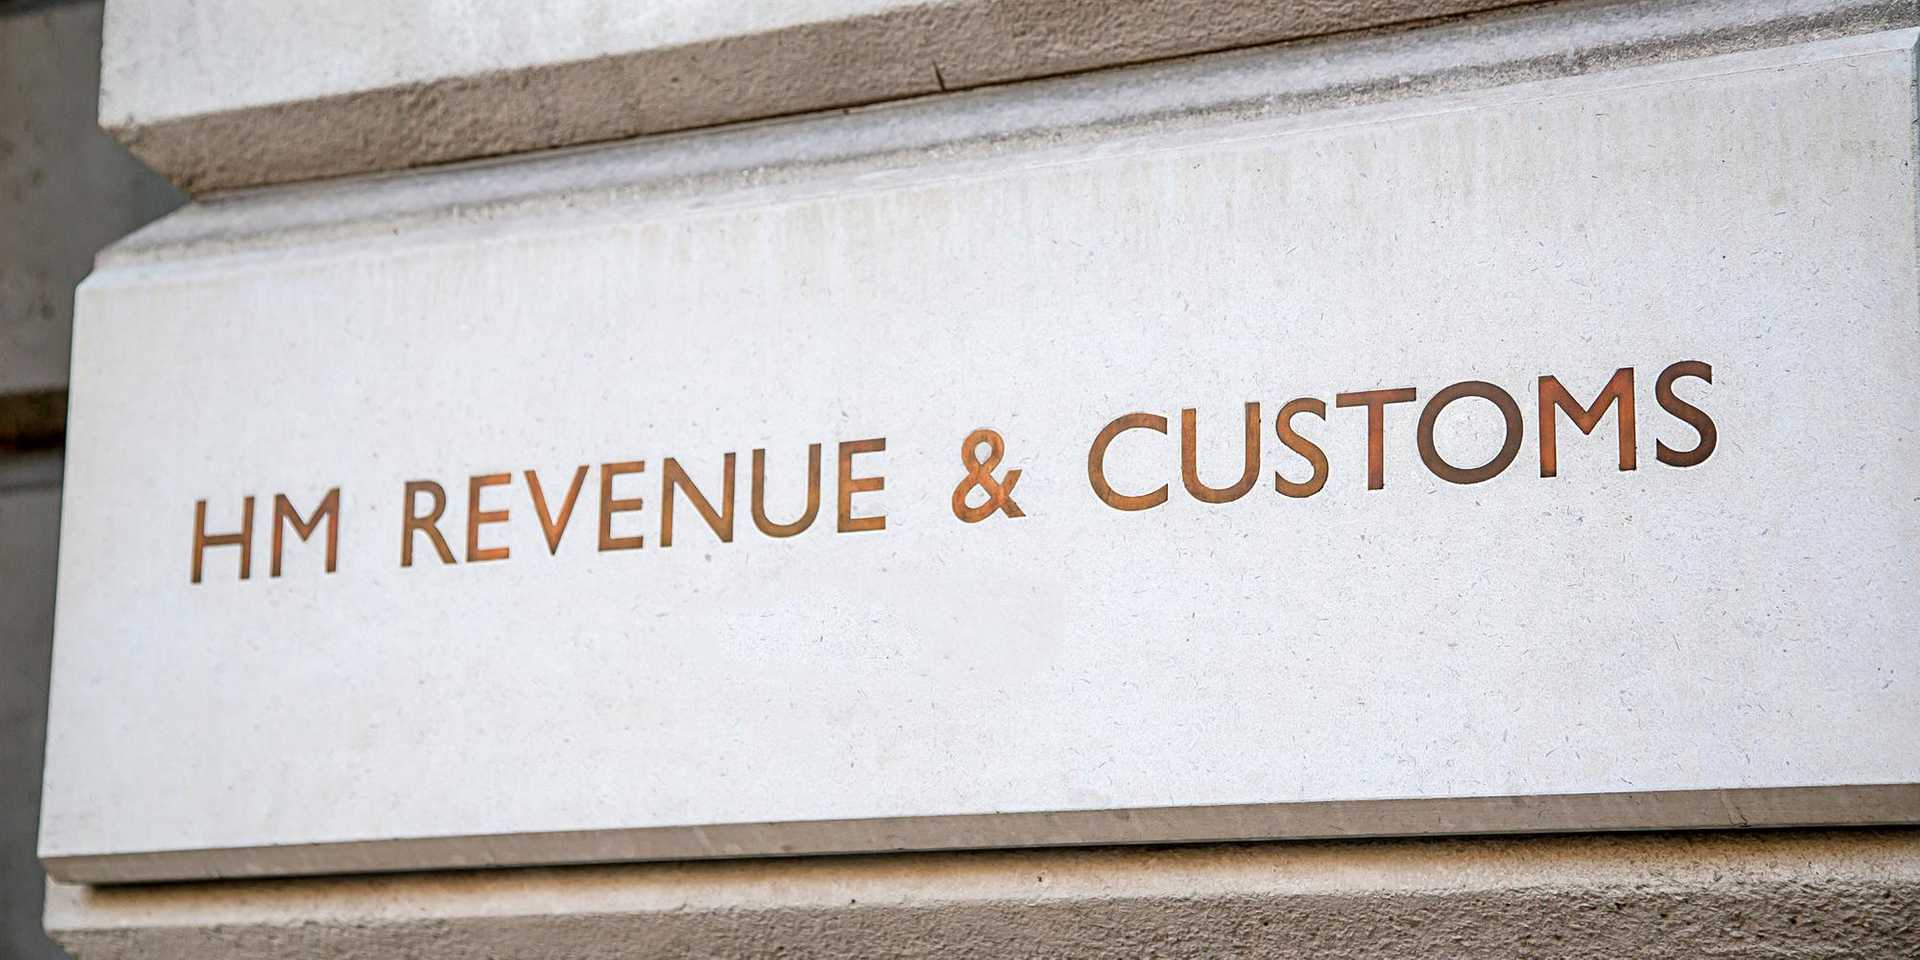 HM Revenue & Customs written in stone on their building entrance